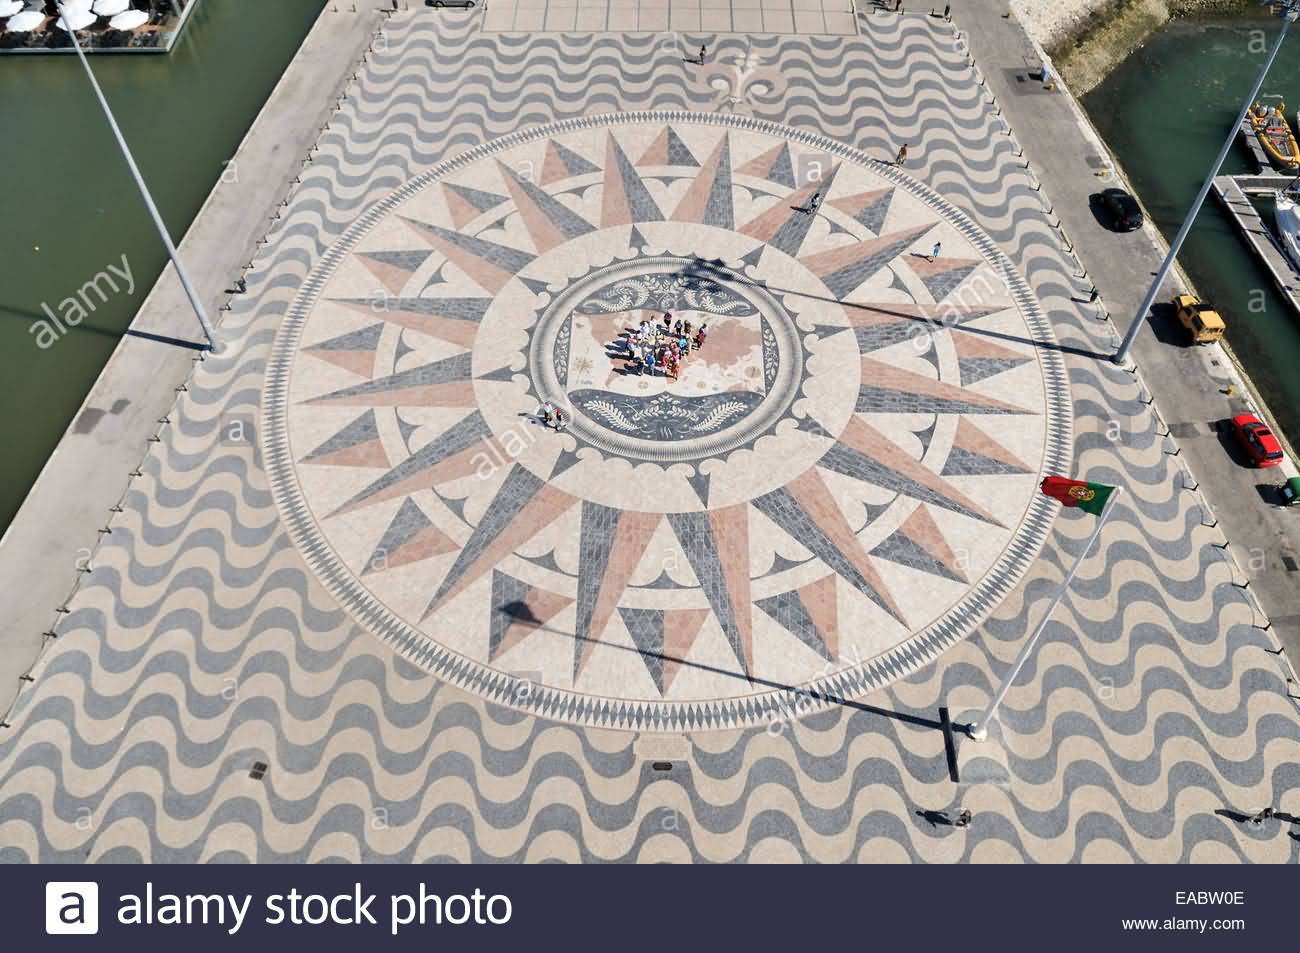 Compass Rose And World Map At The Foot Of The Padrao Dos Descobrimentos